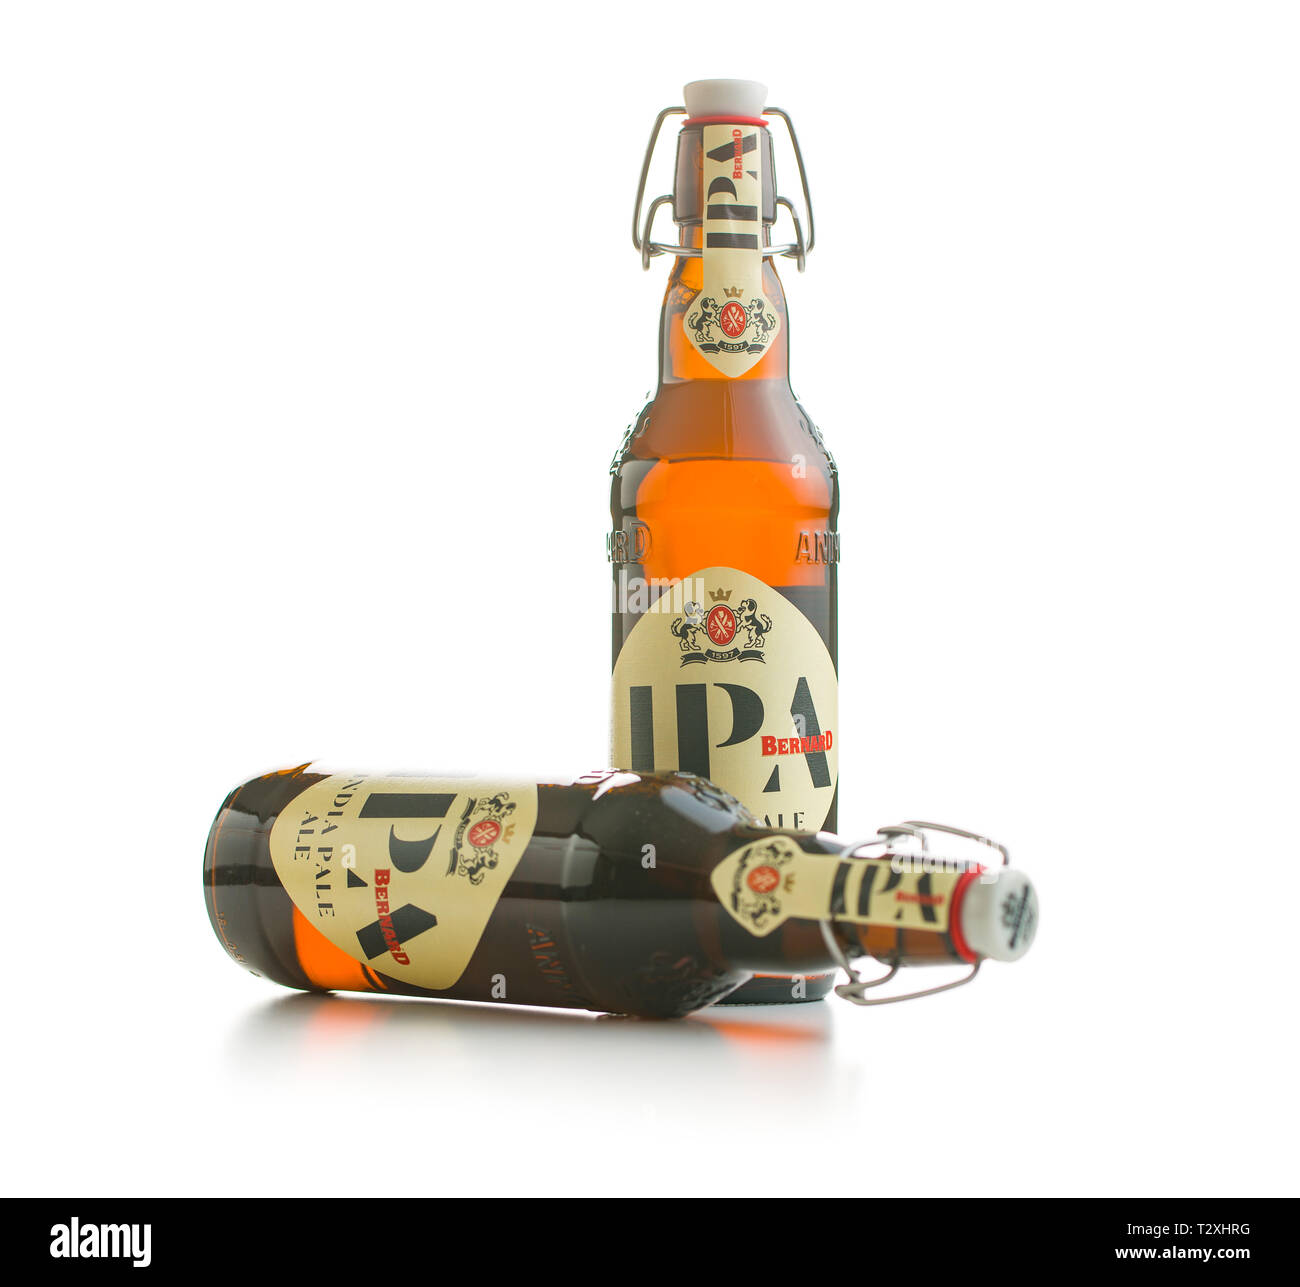 IPA india pale ale beer.  IPA beer made in Czech brewery Bernard. Stock Photo